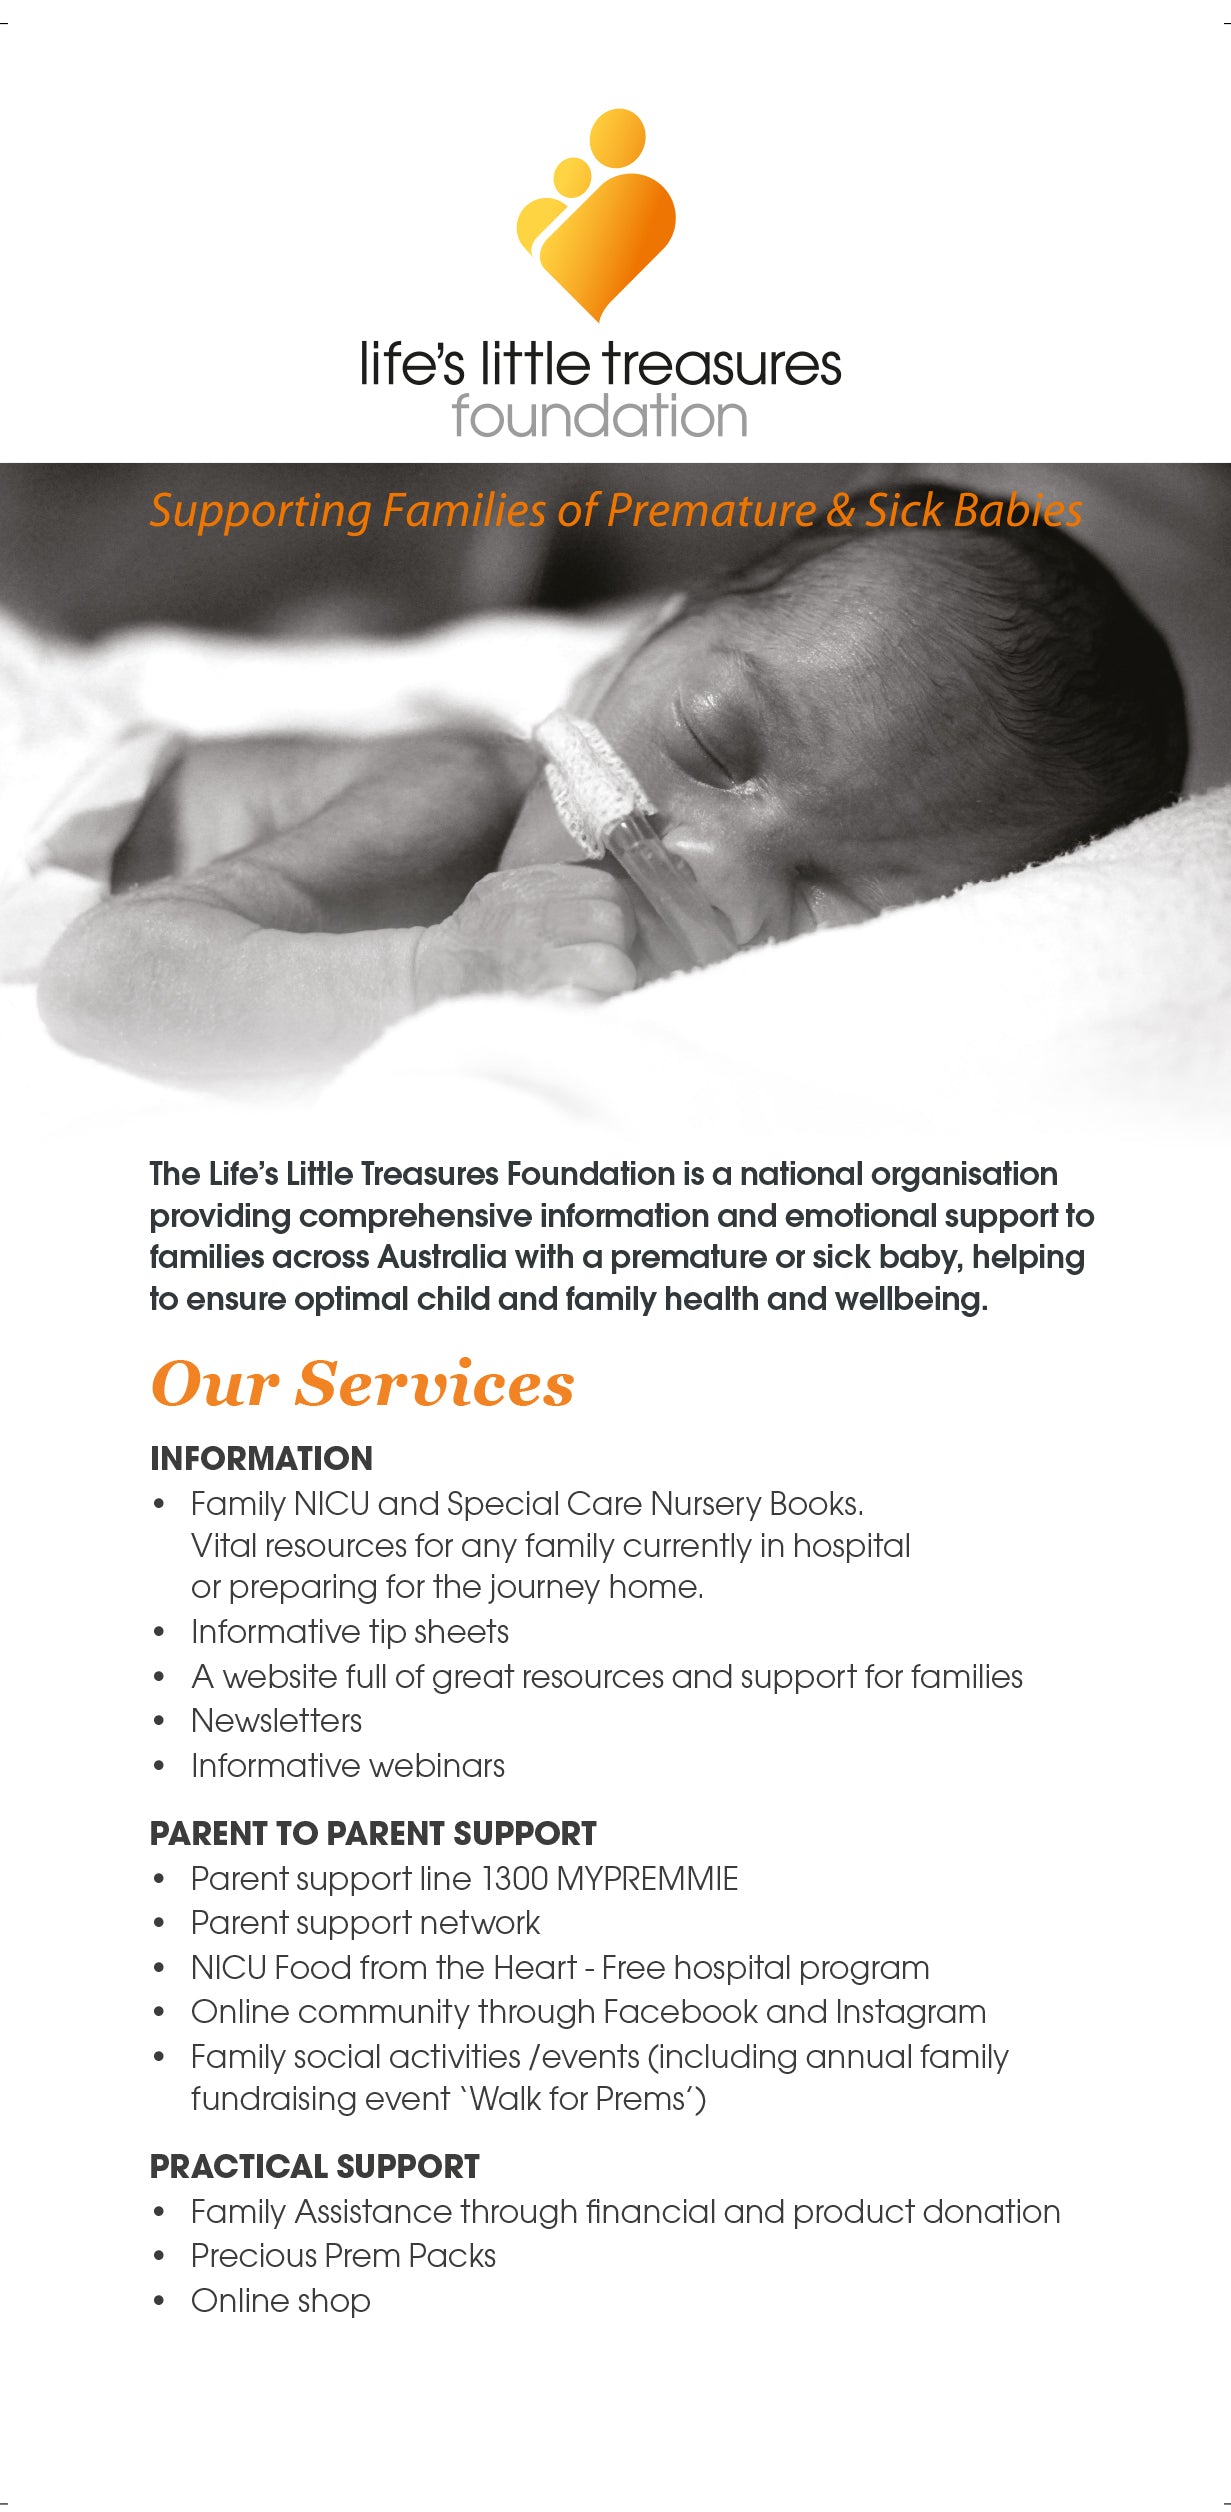 Our Services Flyer